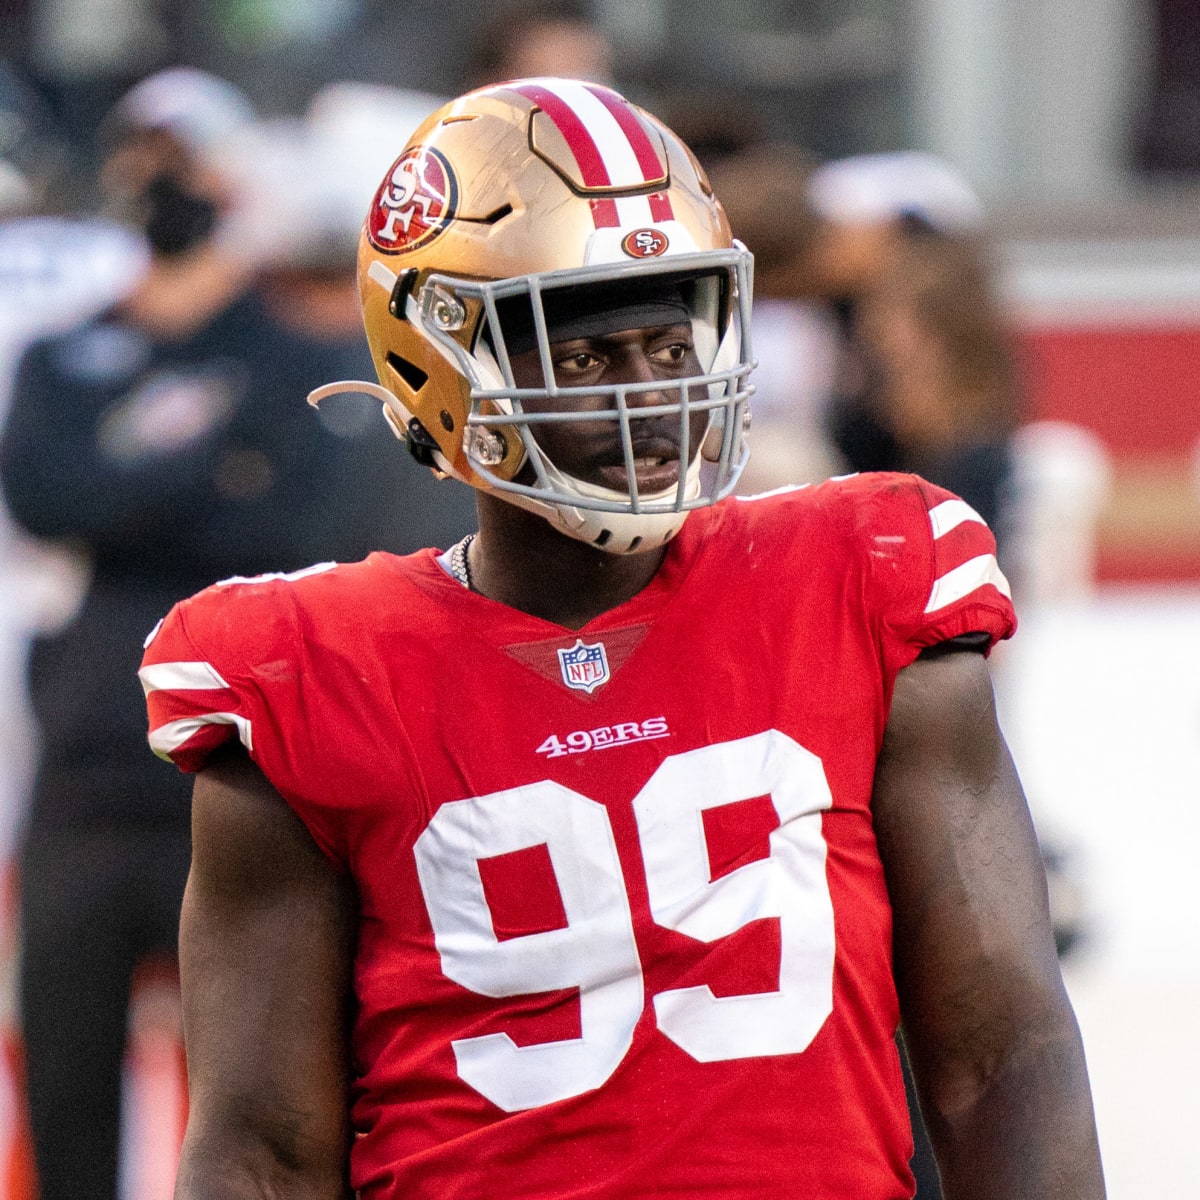 Javon Kinlaw Eviscerates 49ers Reporter After Heated Practice